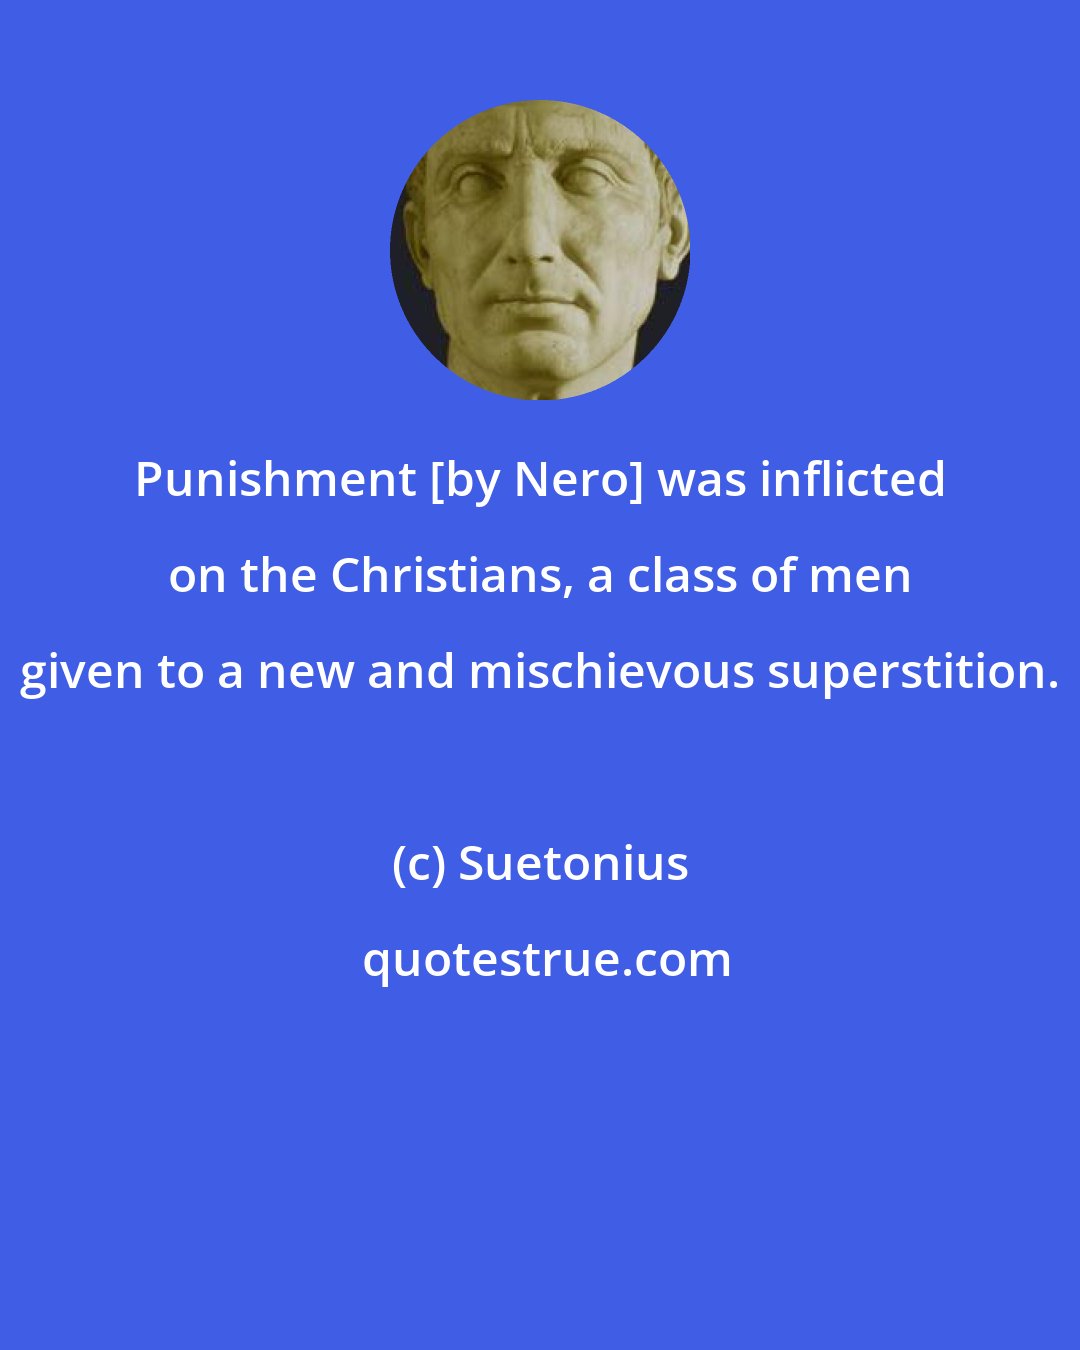 Suetonius: Punishment [by Nero] was inflicted on the Christians, a class of men given to a new and mischievous superstition.